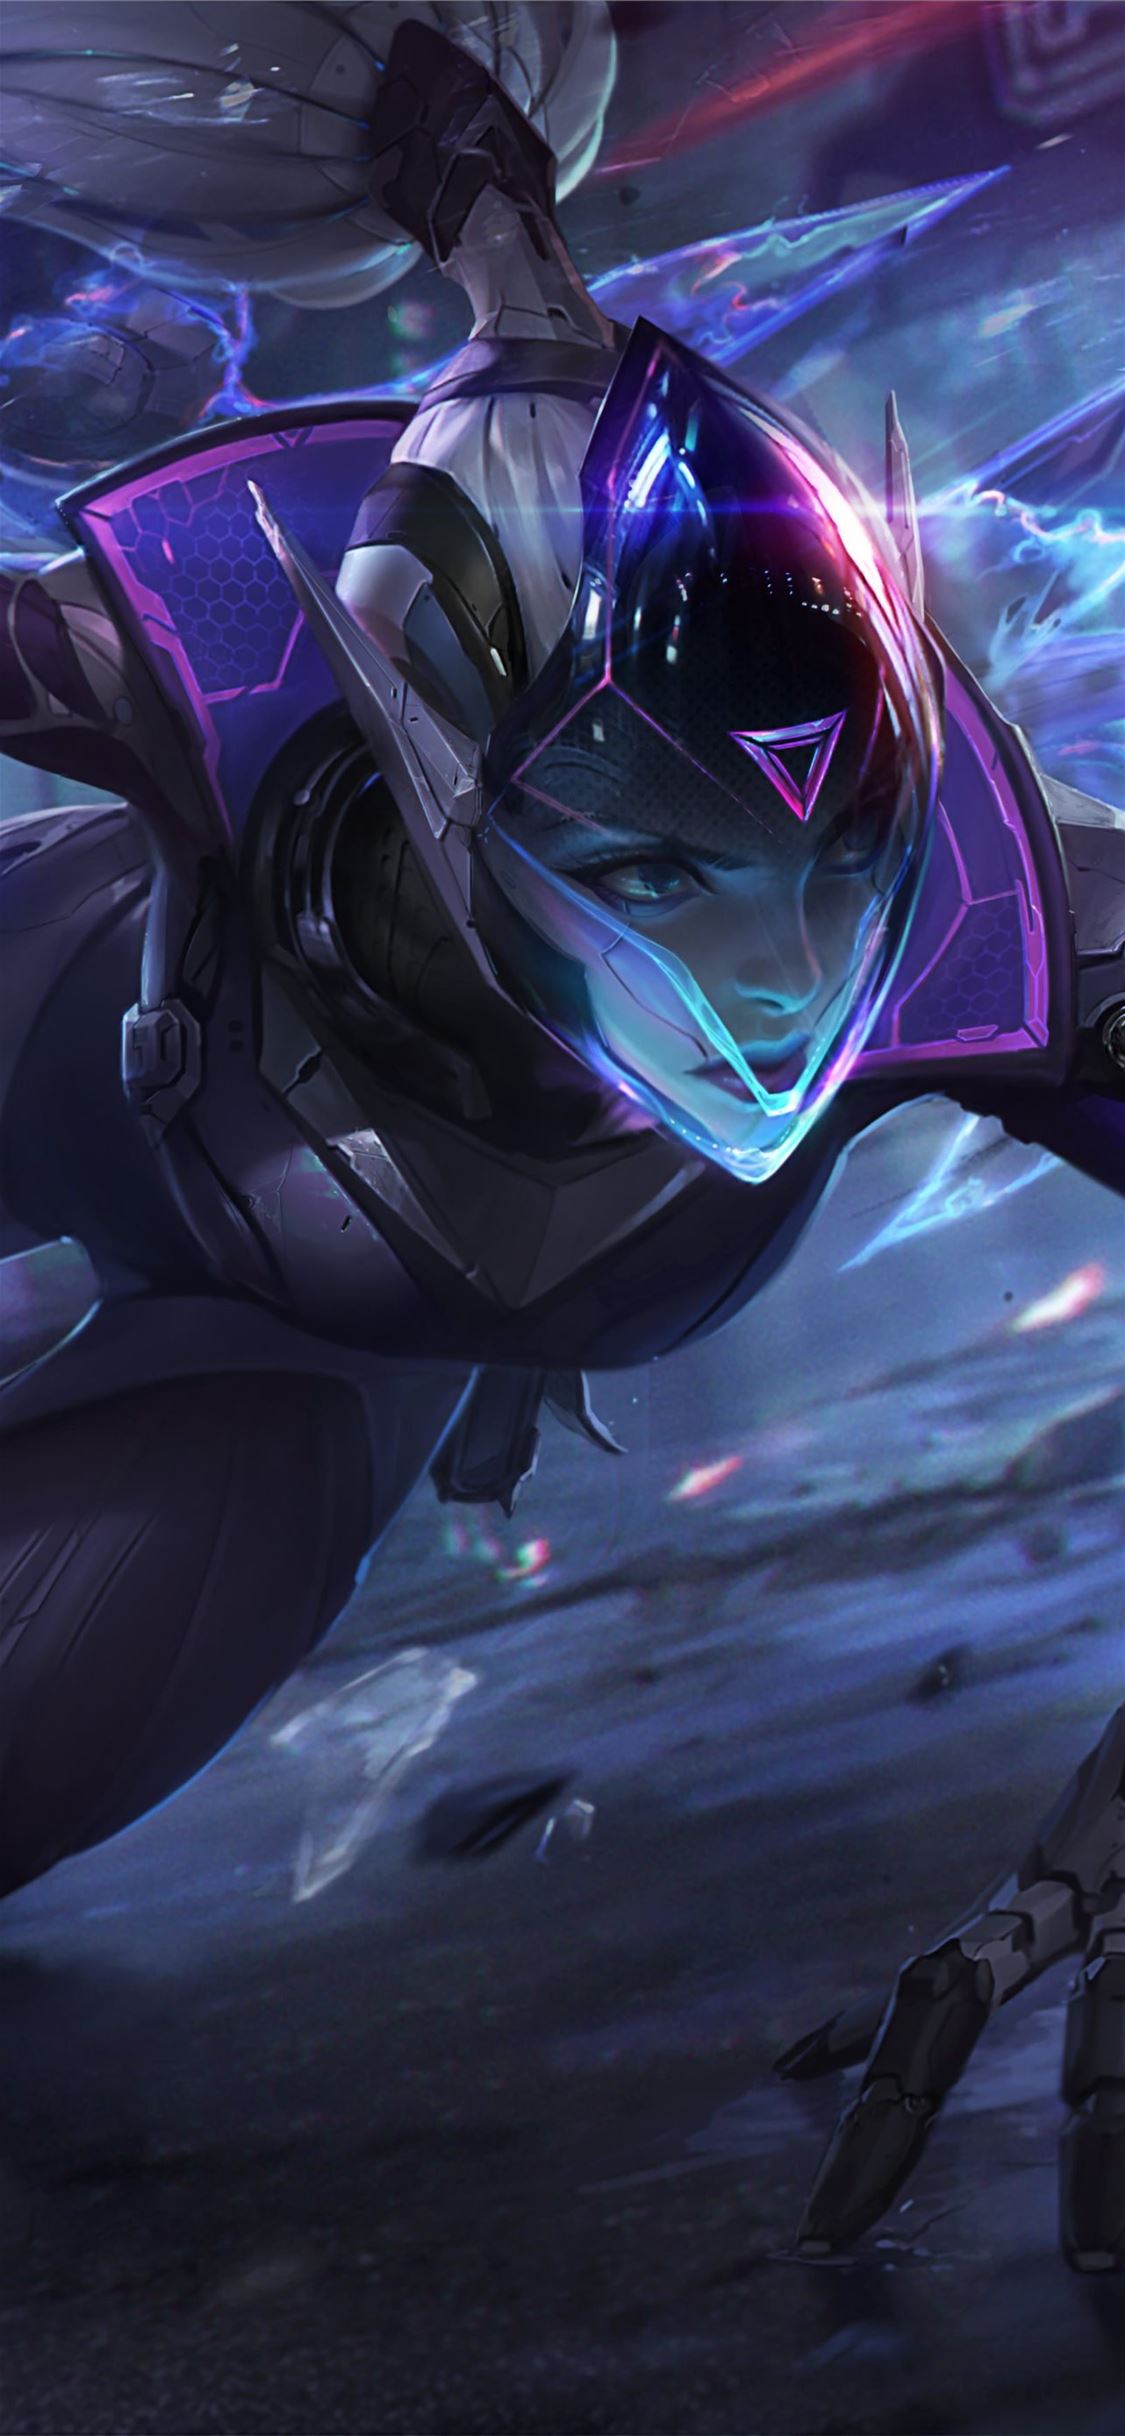 PROJECT Vayne League of Legends ID 3126 iPhone Wallpapers Free Download